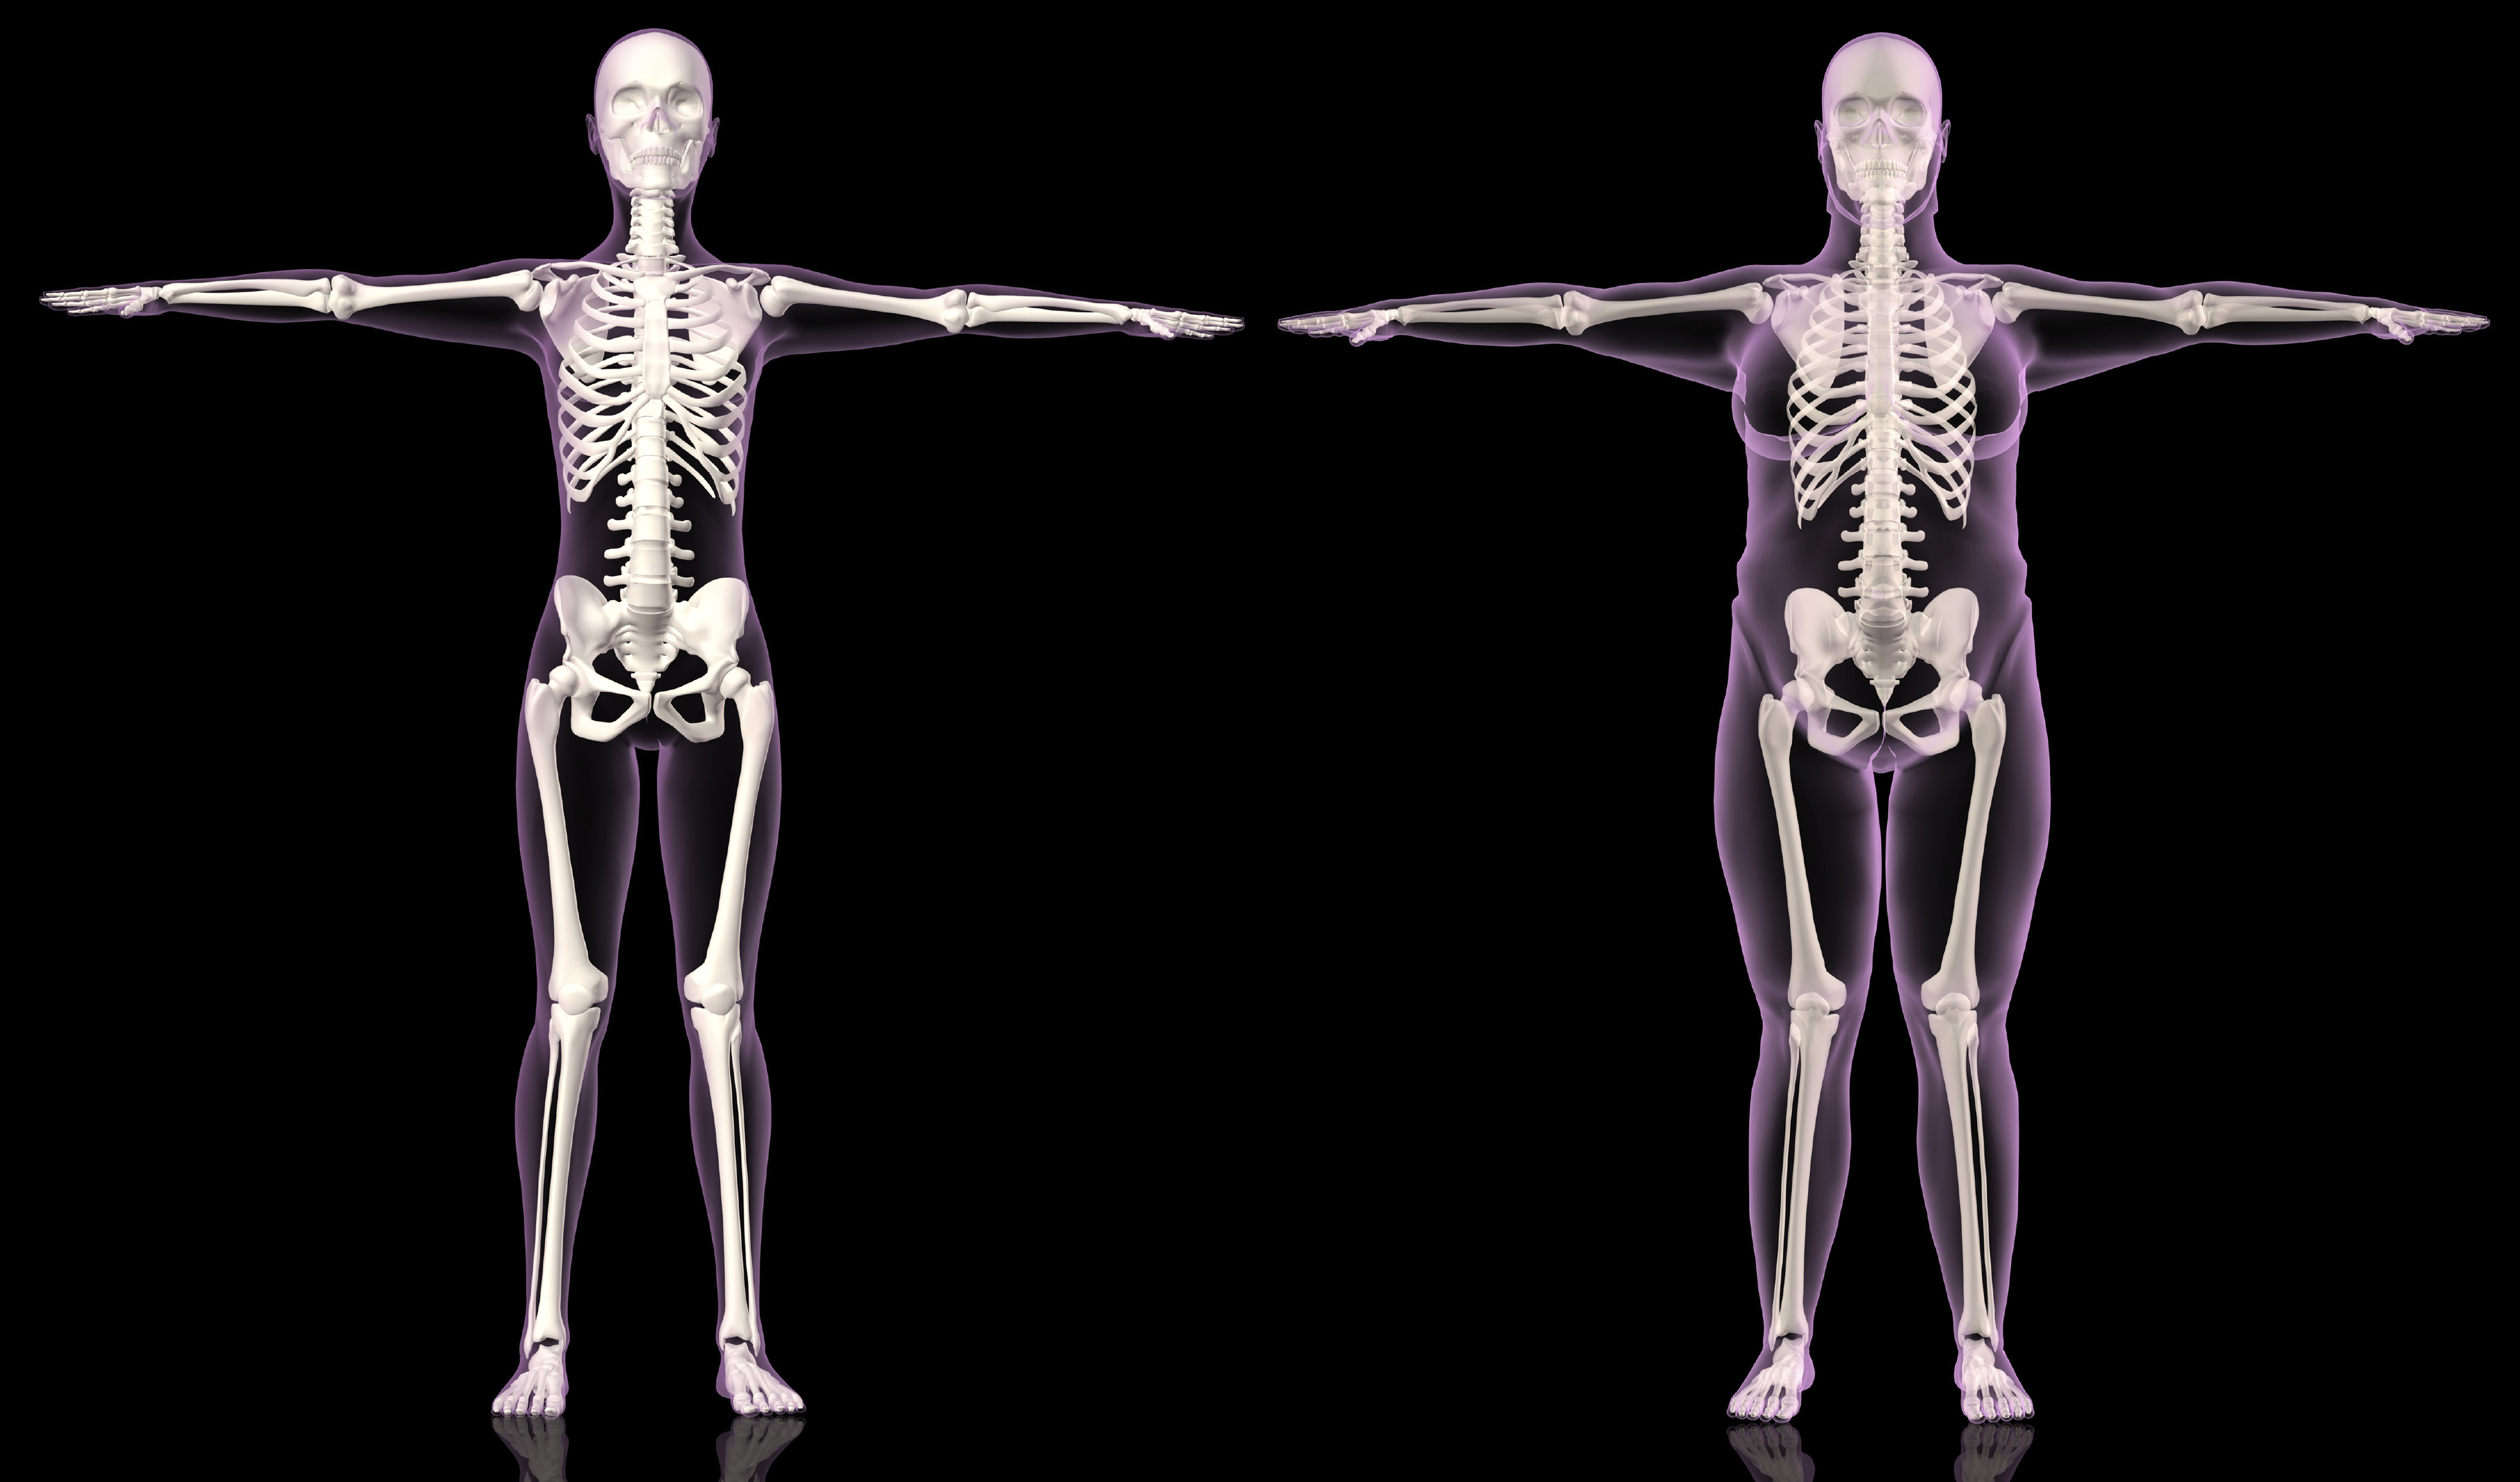 illustration of skeletons: one of ideal weight, one that is obese